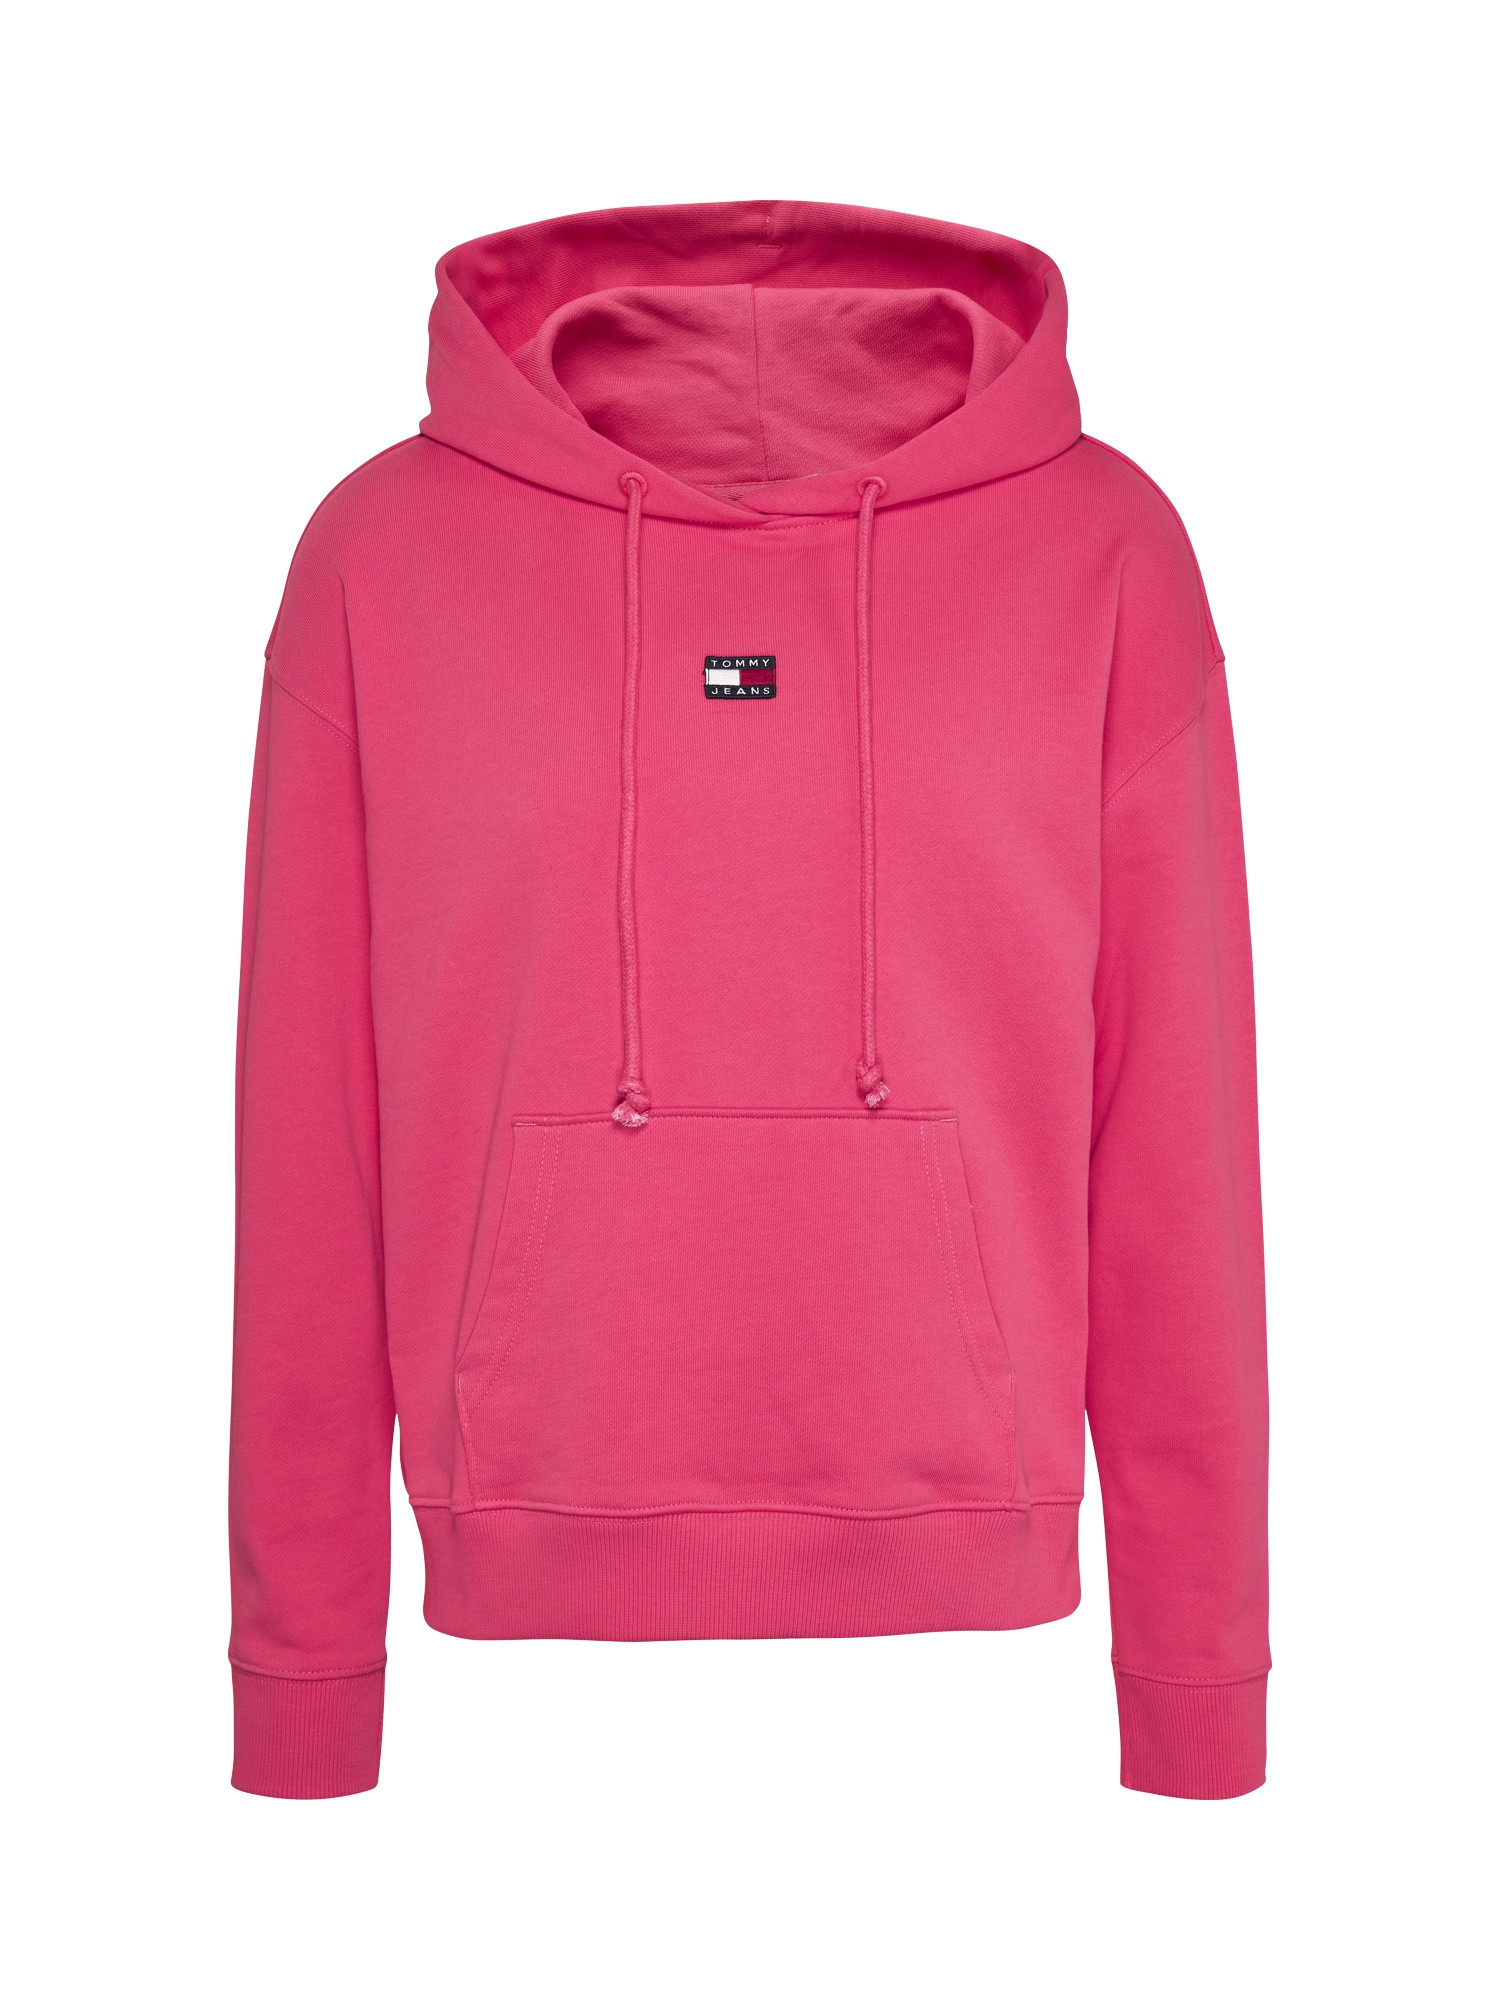 Tommy Jeans - Cotton hooded sweatshirt, Pink Fuchsia, large image number 0